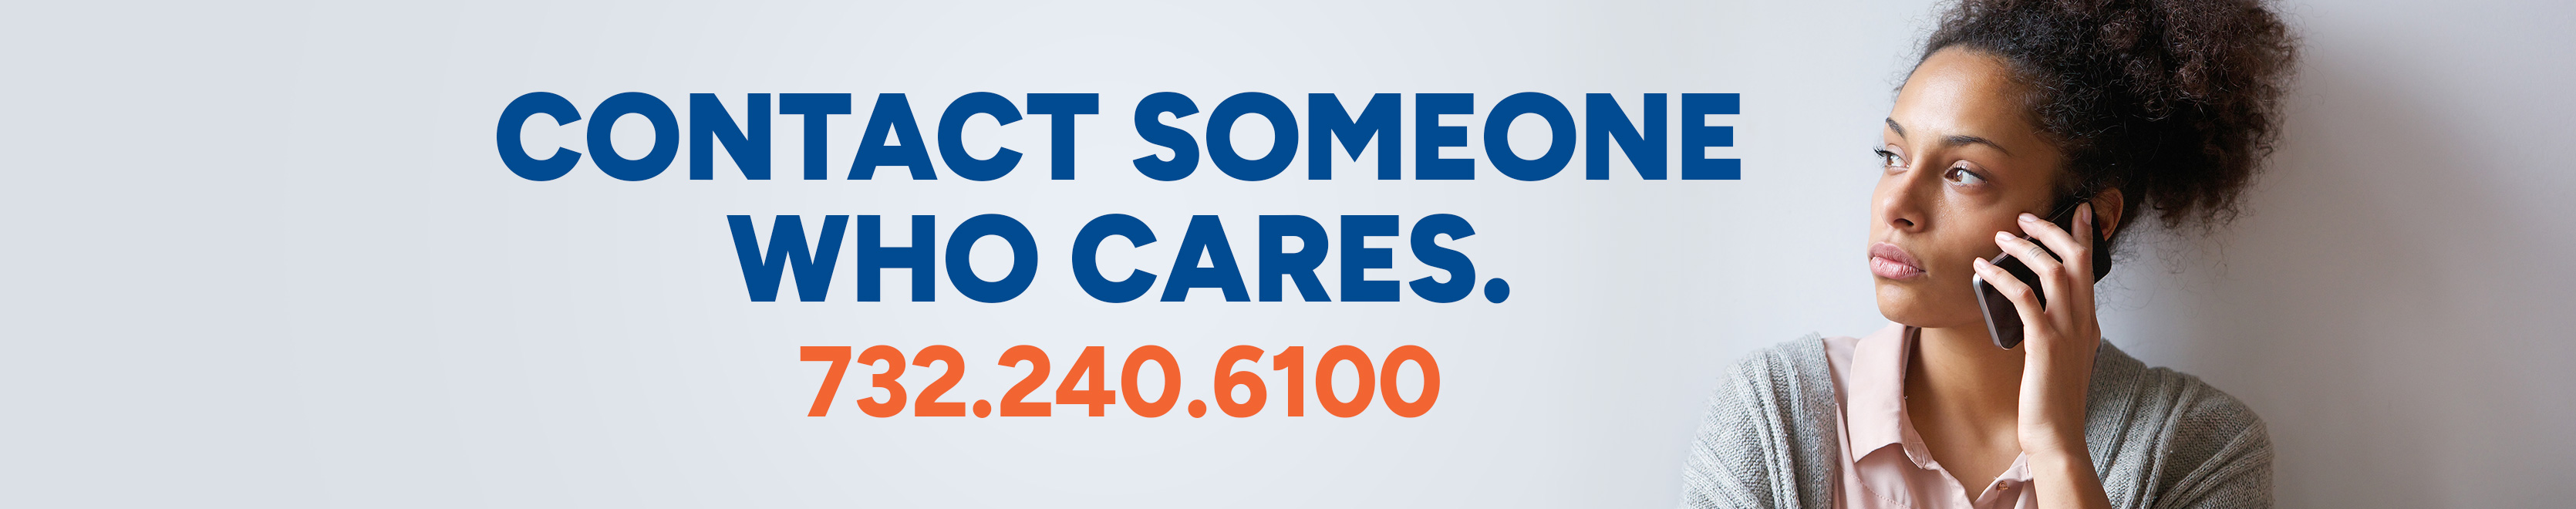 Contact Someone Who Cares 732.240.6100